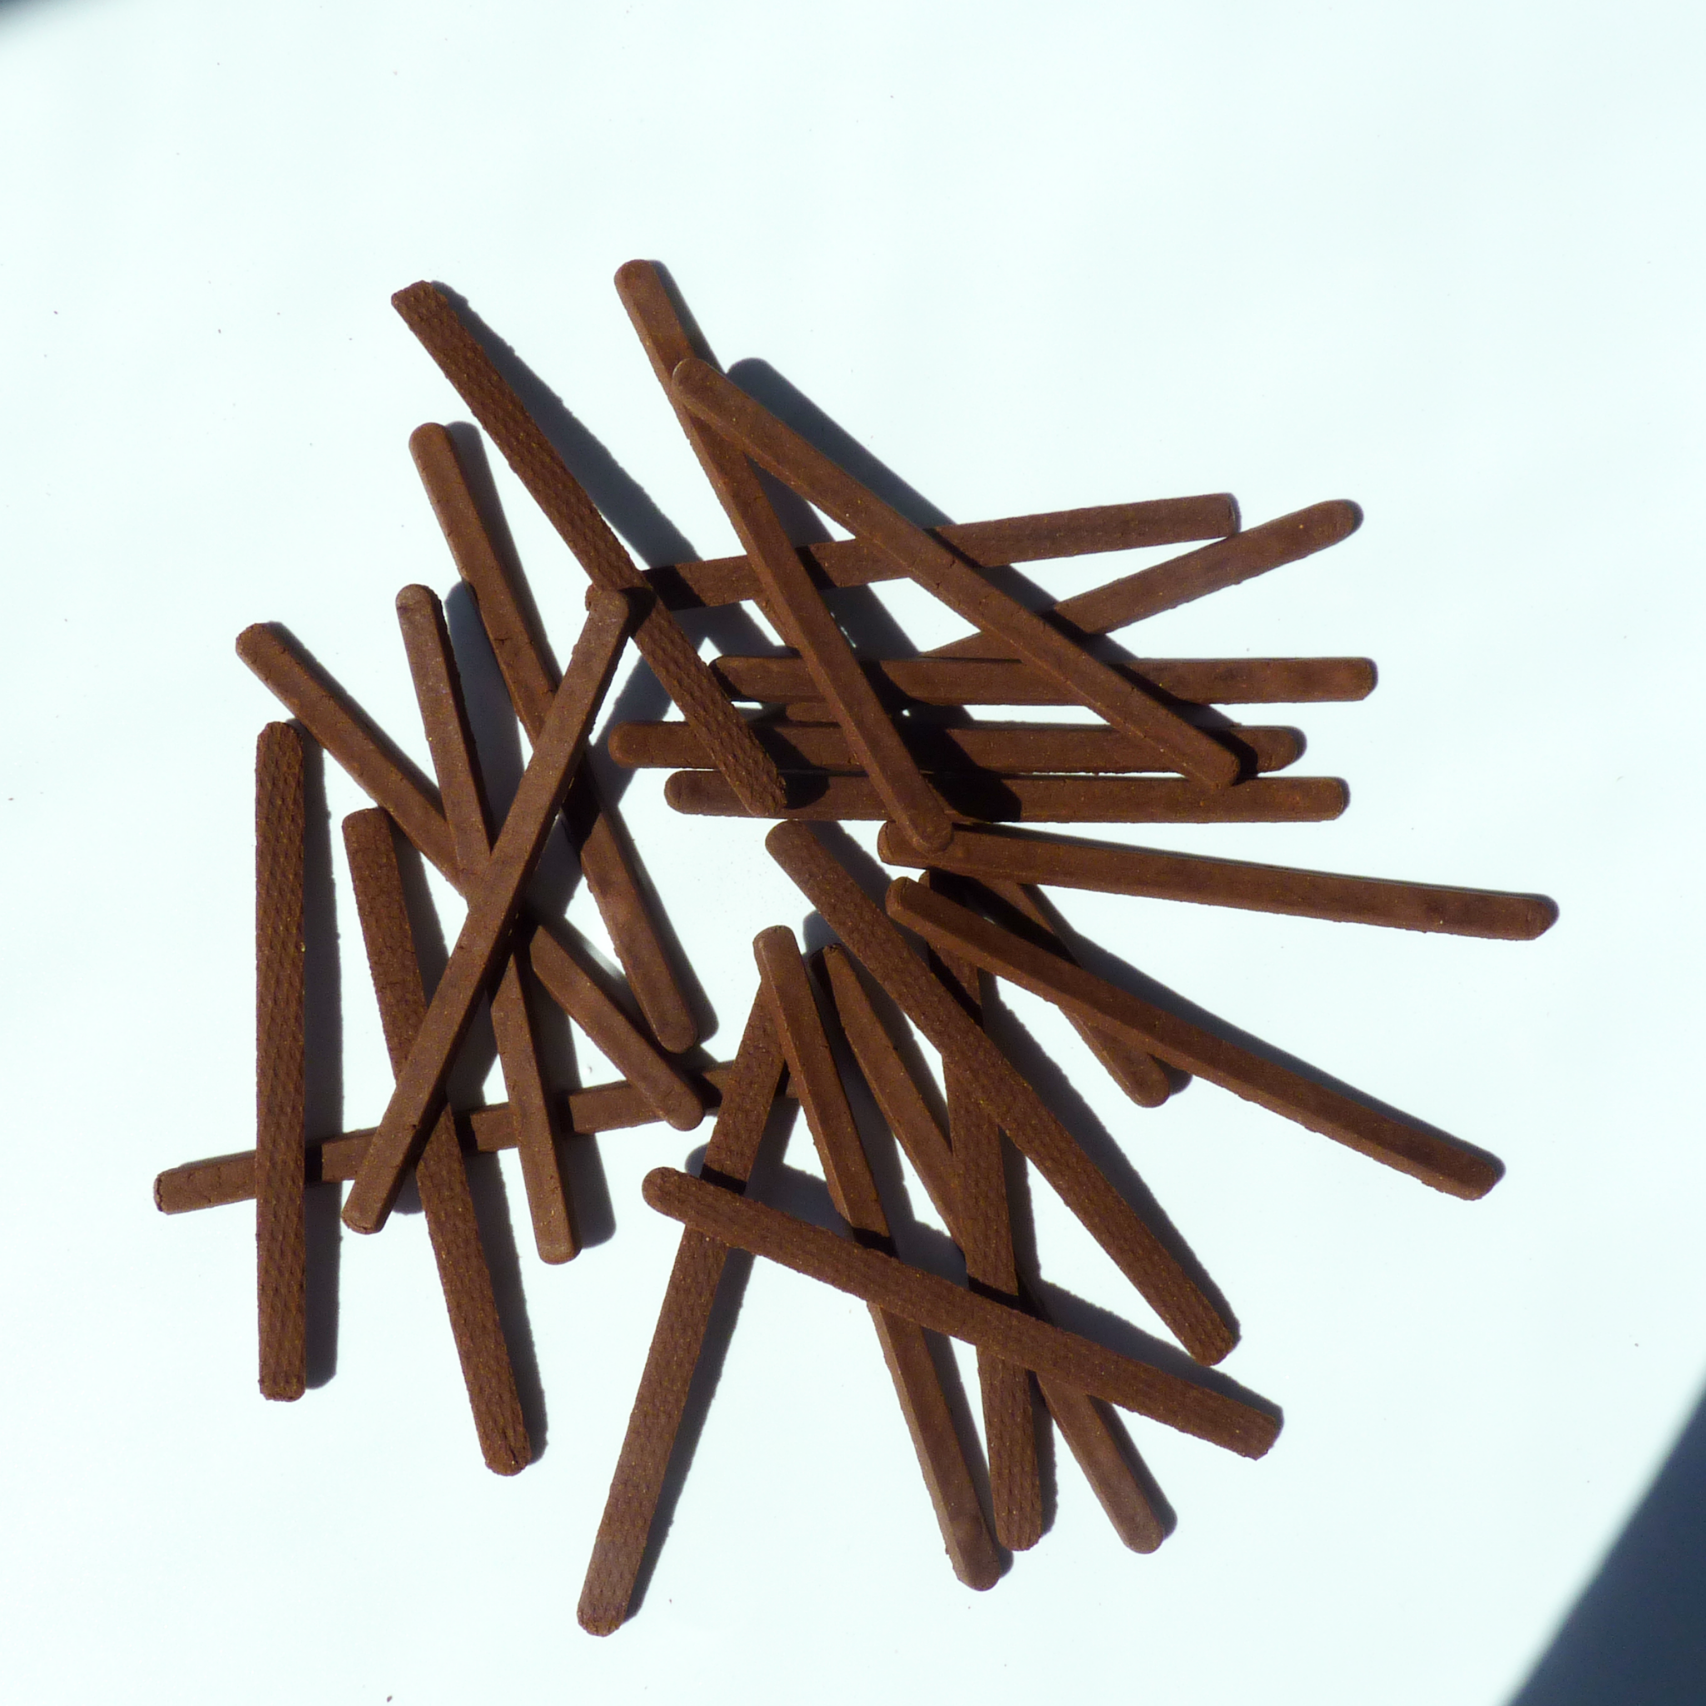 Chocolate Flavored Coffee Stirrers - Edibles